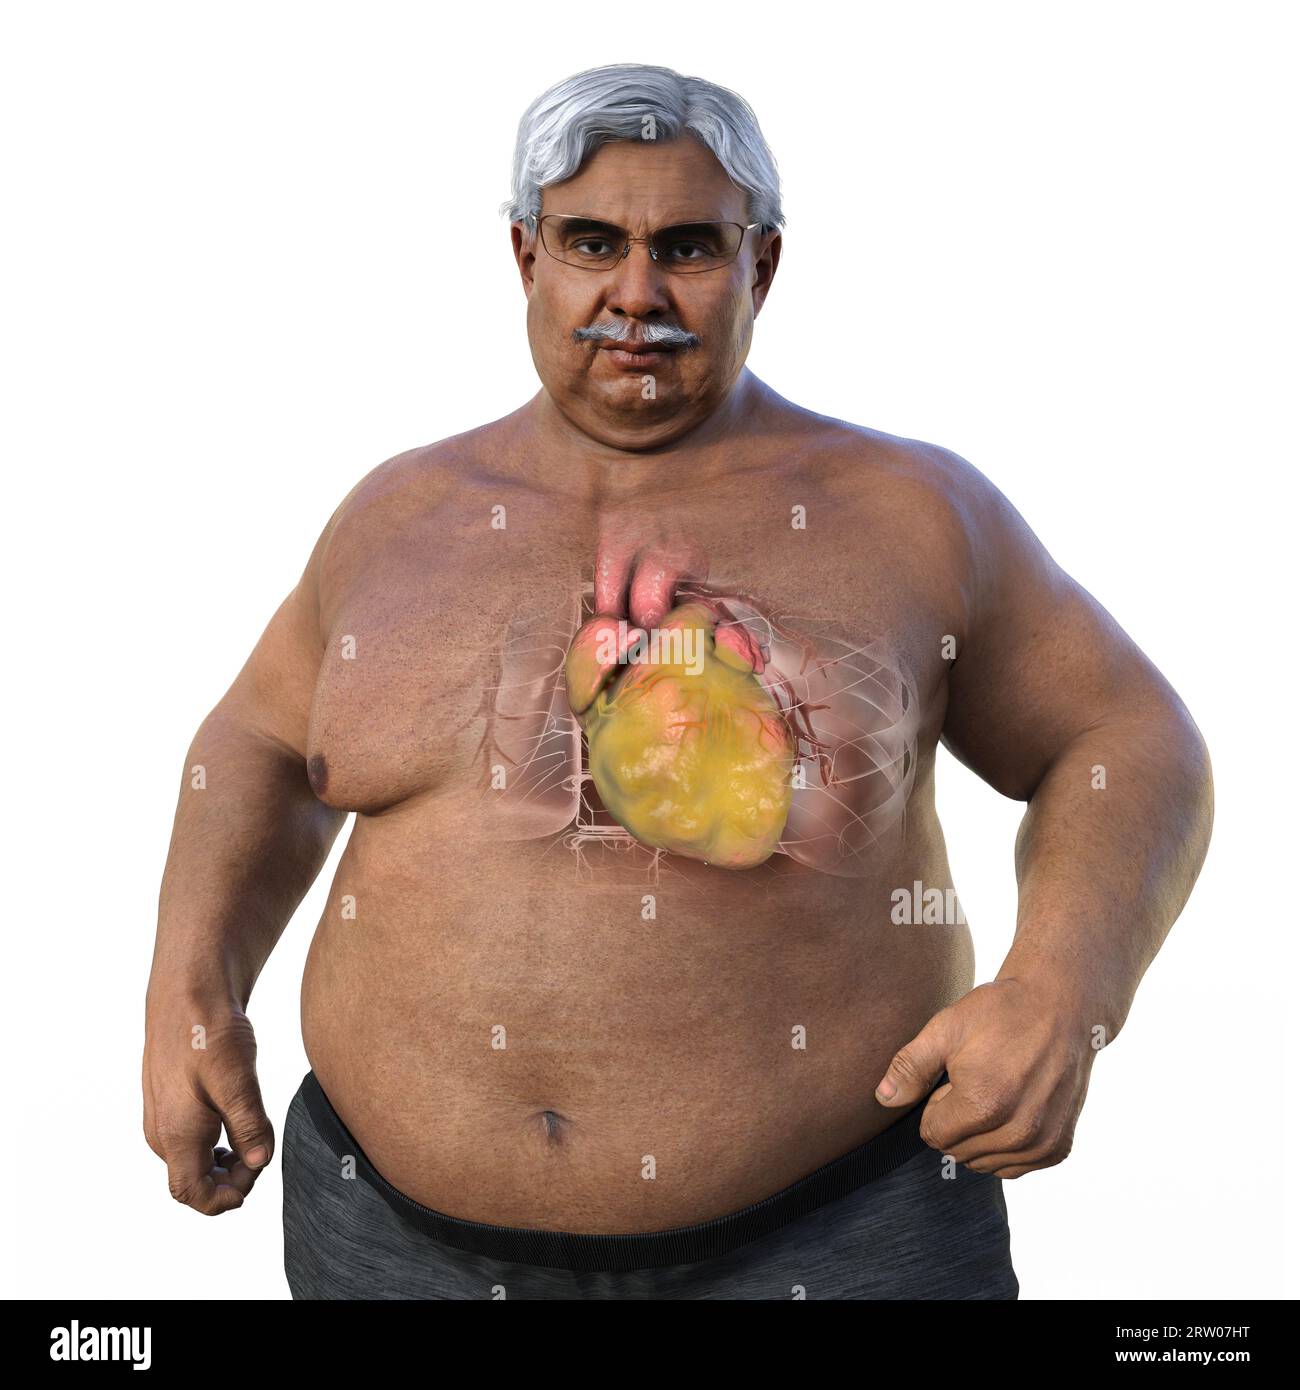 Overweight man with enlarged heart, illustration Stock Photo